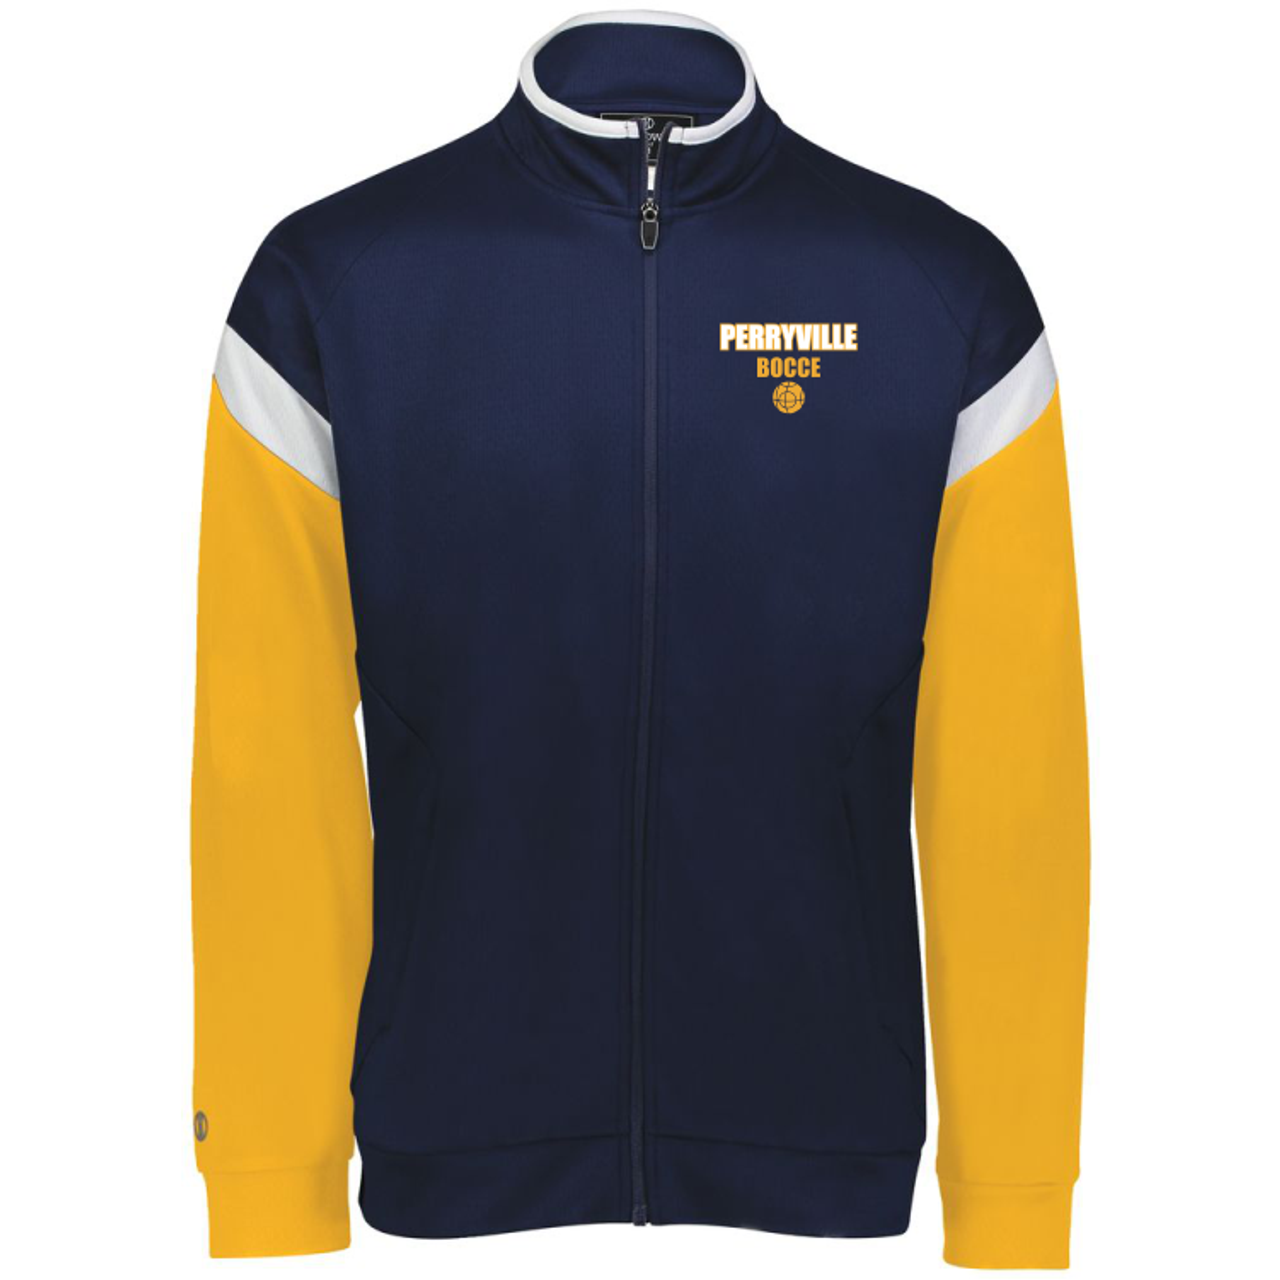 Perryville MS Bocce Warm Up Jacket